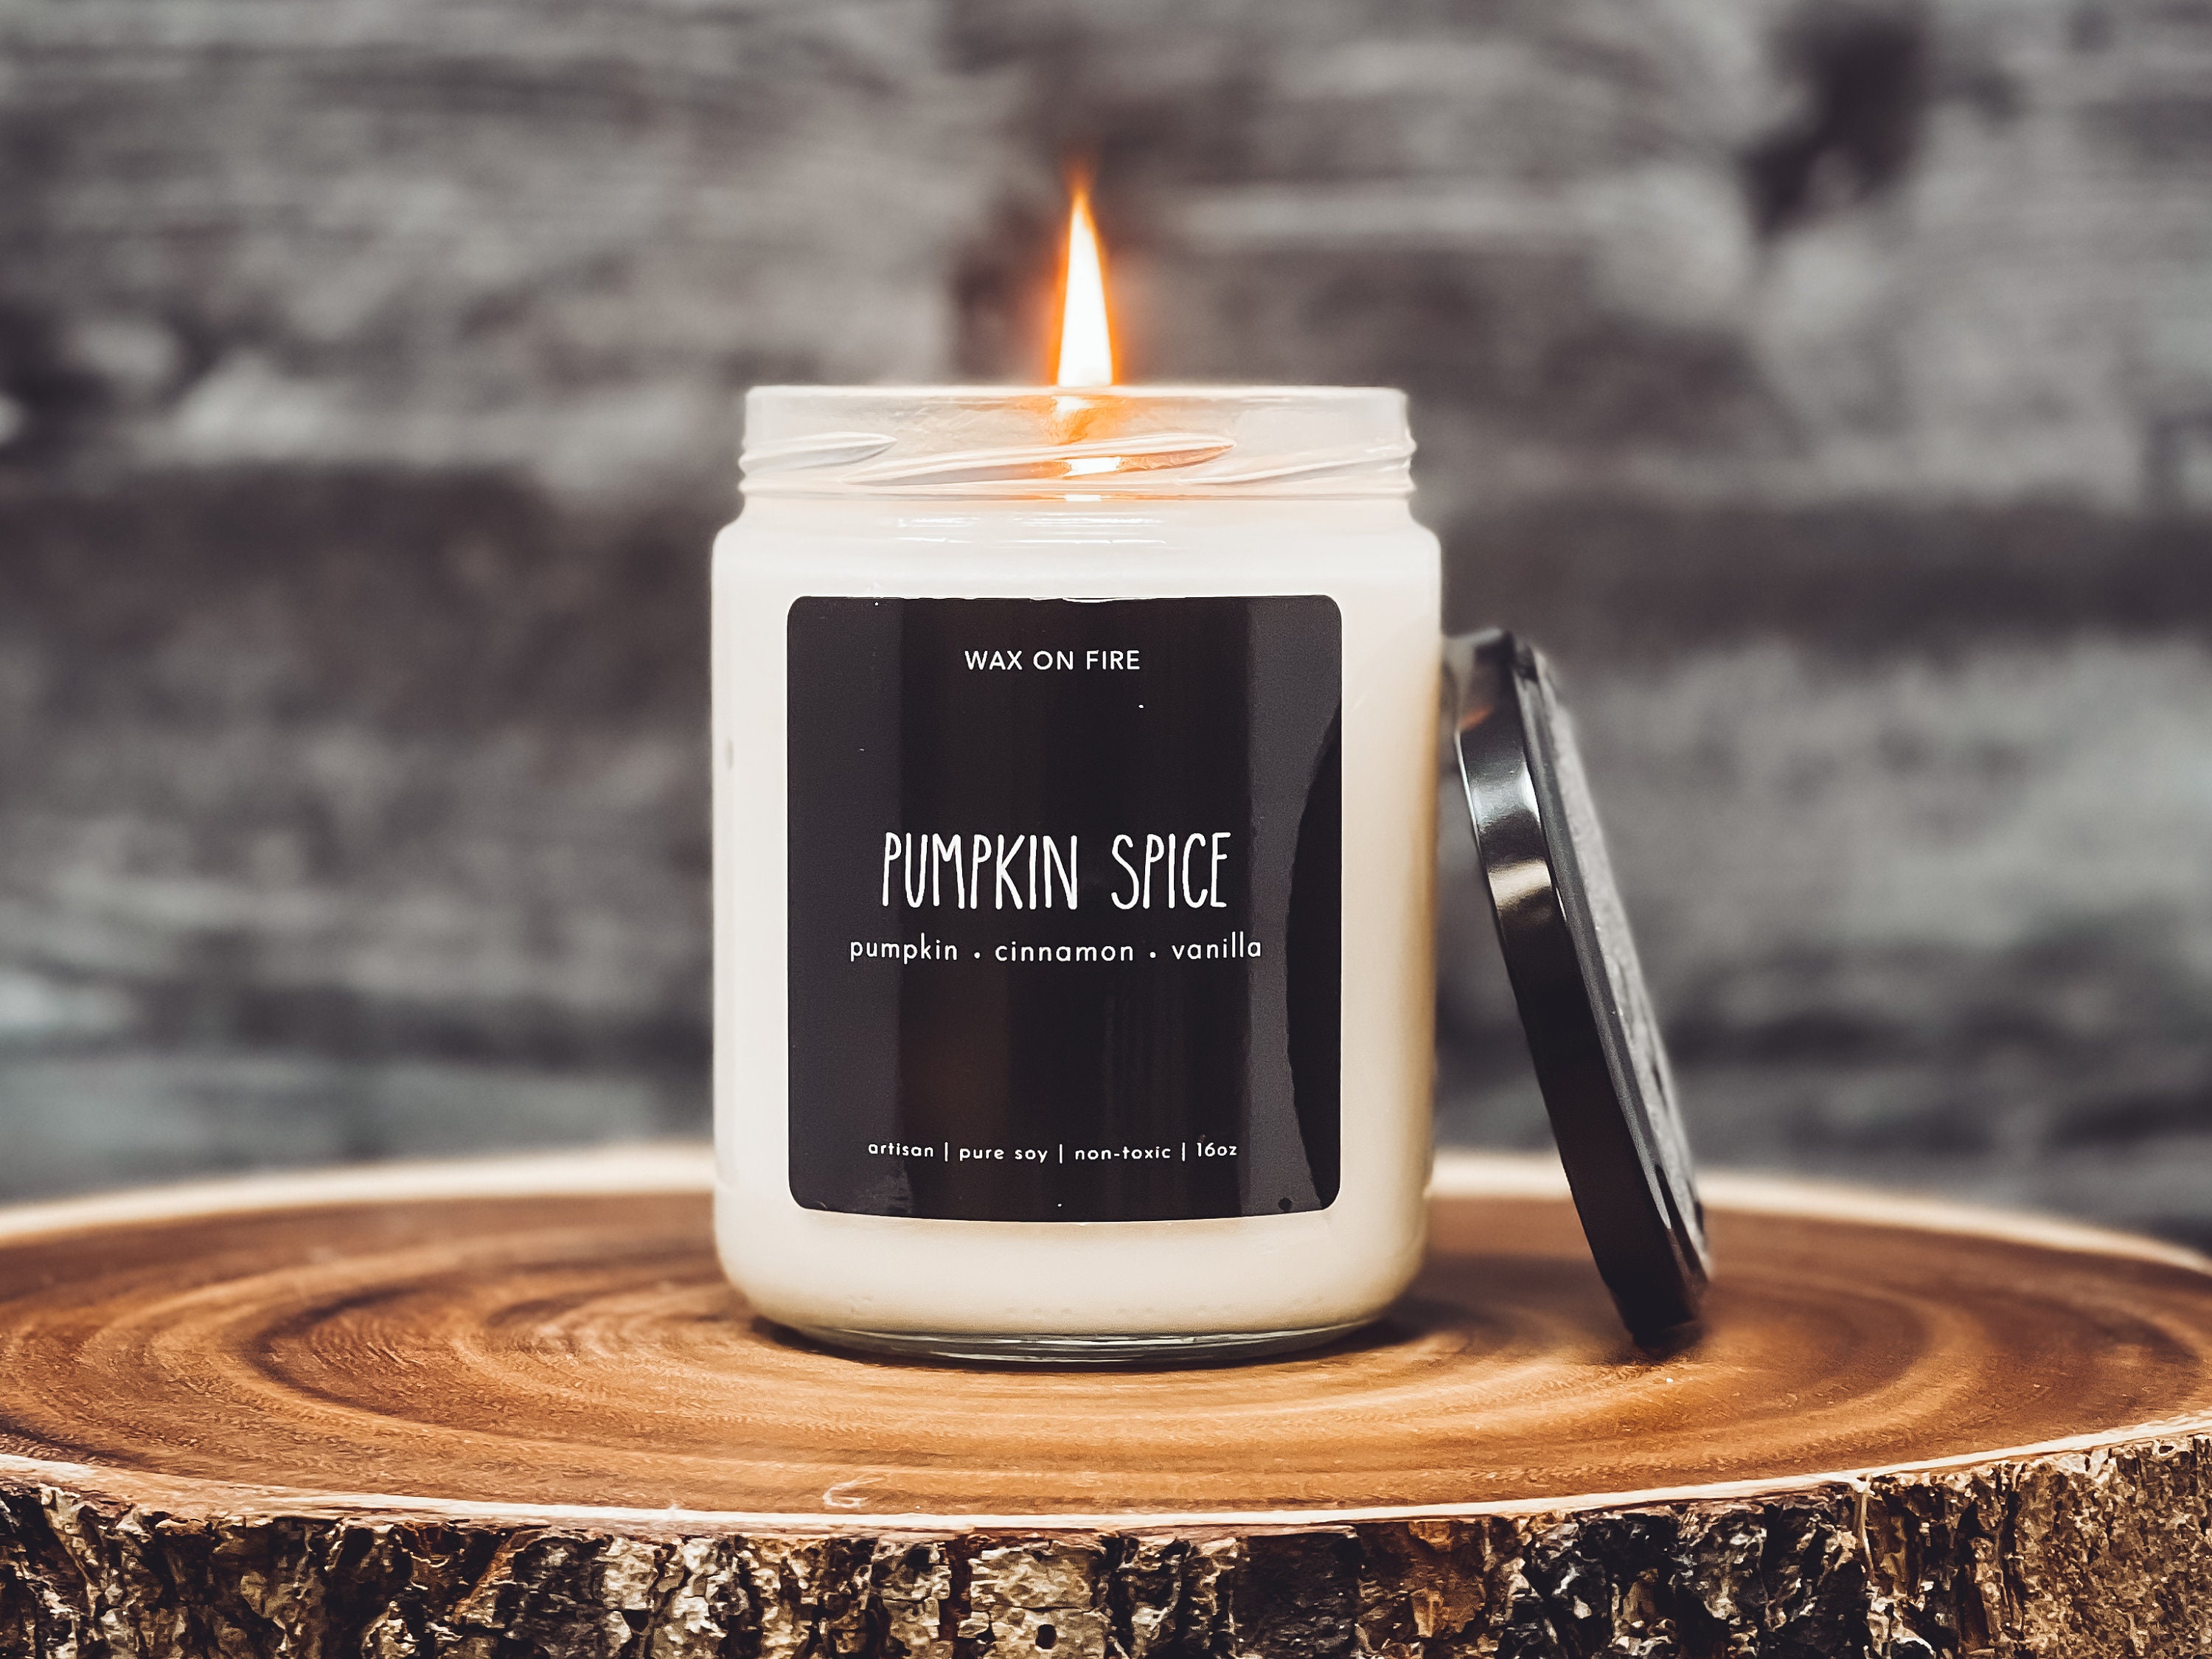 Pumpkin Spice Candle Etsy New Zealand